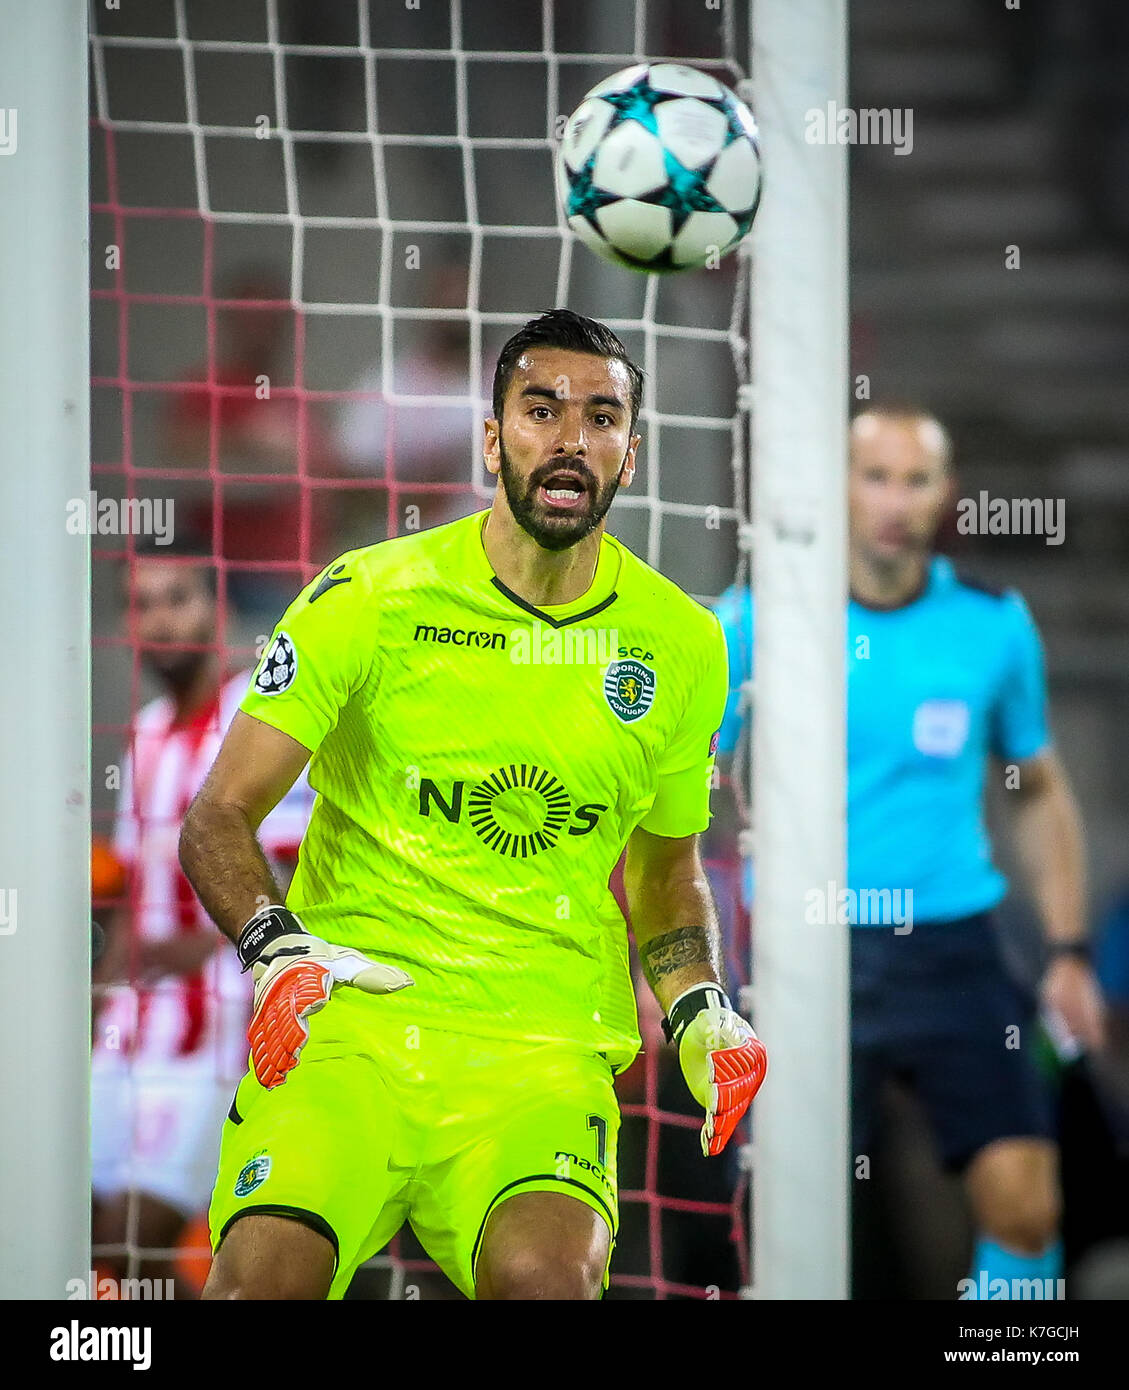 Piraeus, Greece - Sempteber 12, 2017: Player of Sporting Rui Patricio in action during the UEFA Champions League game between Olympiacos vs Sporting C Stock Photo